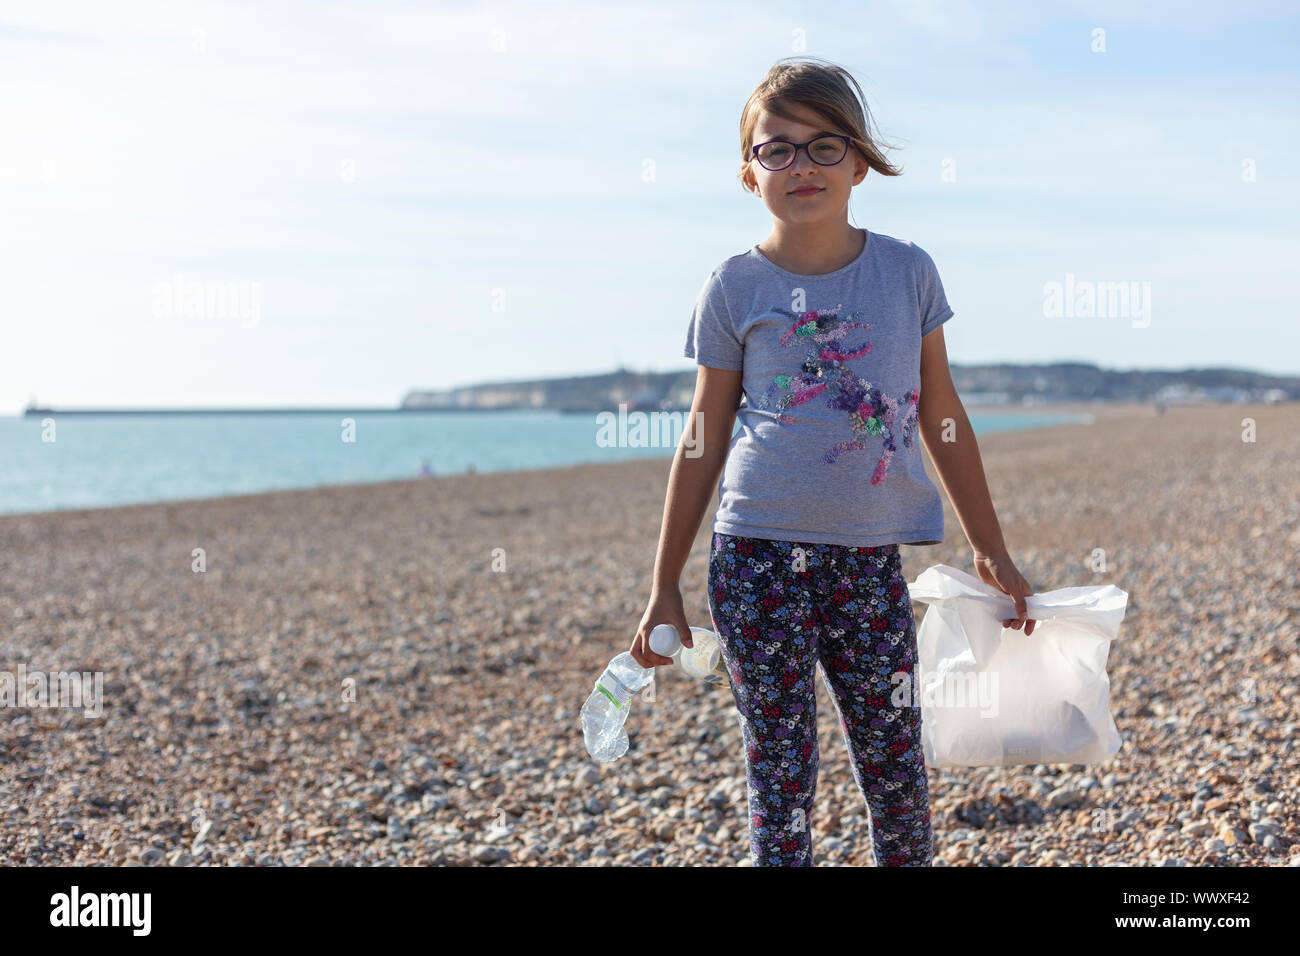 A girl picking up discarded plastic litter on a UK beach Stock Photo